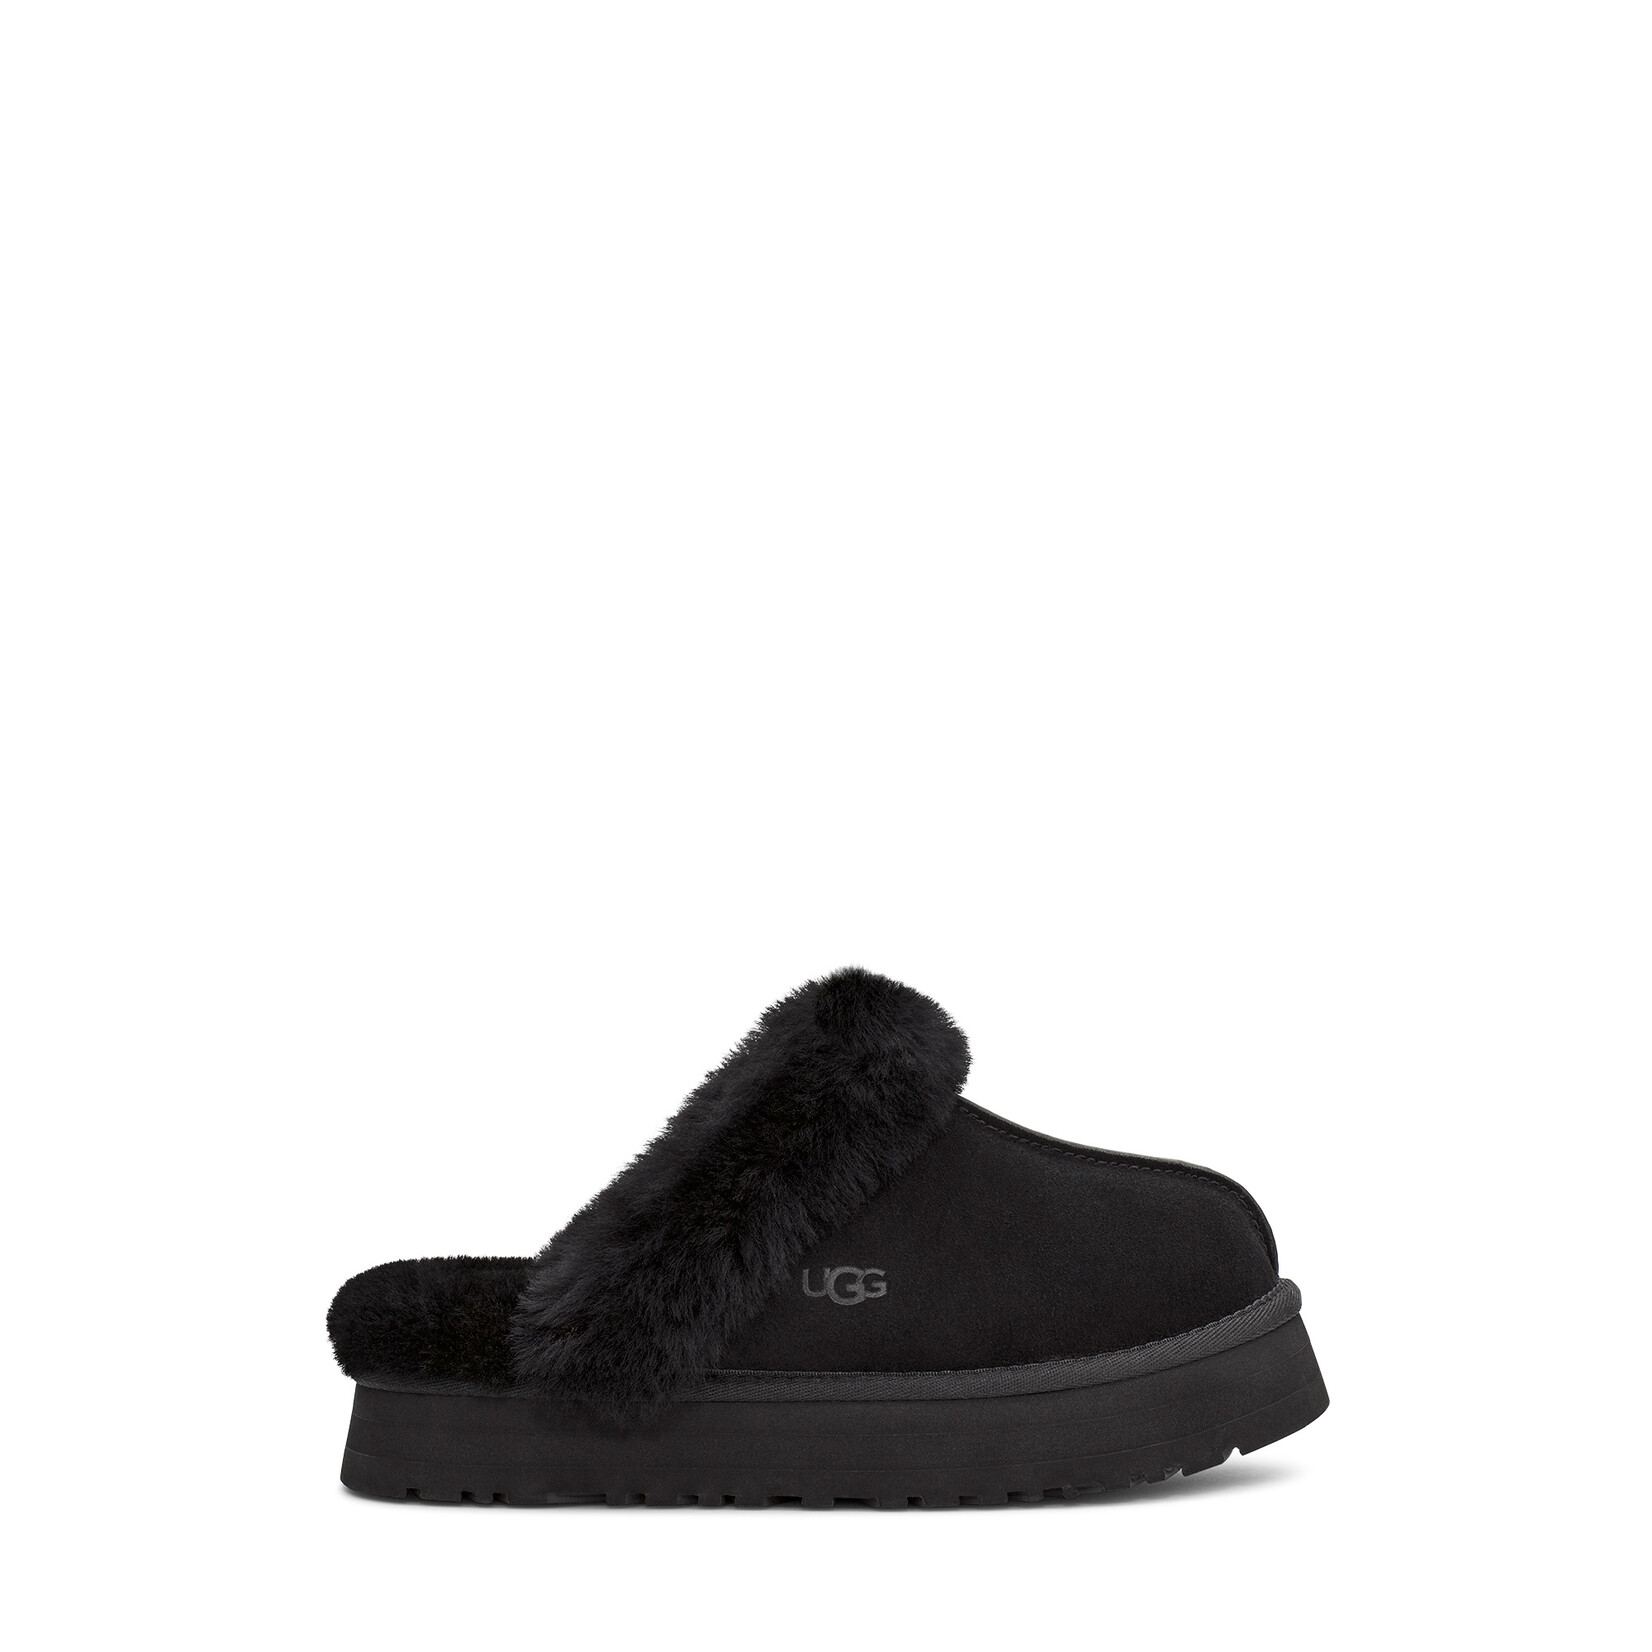 Ugg UGG 1122550 Disquette